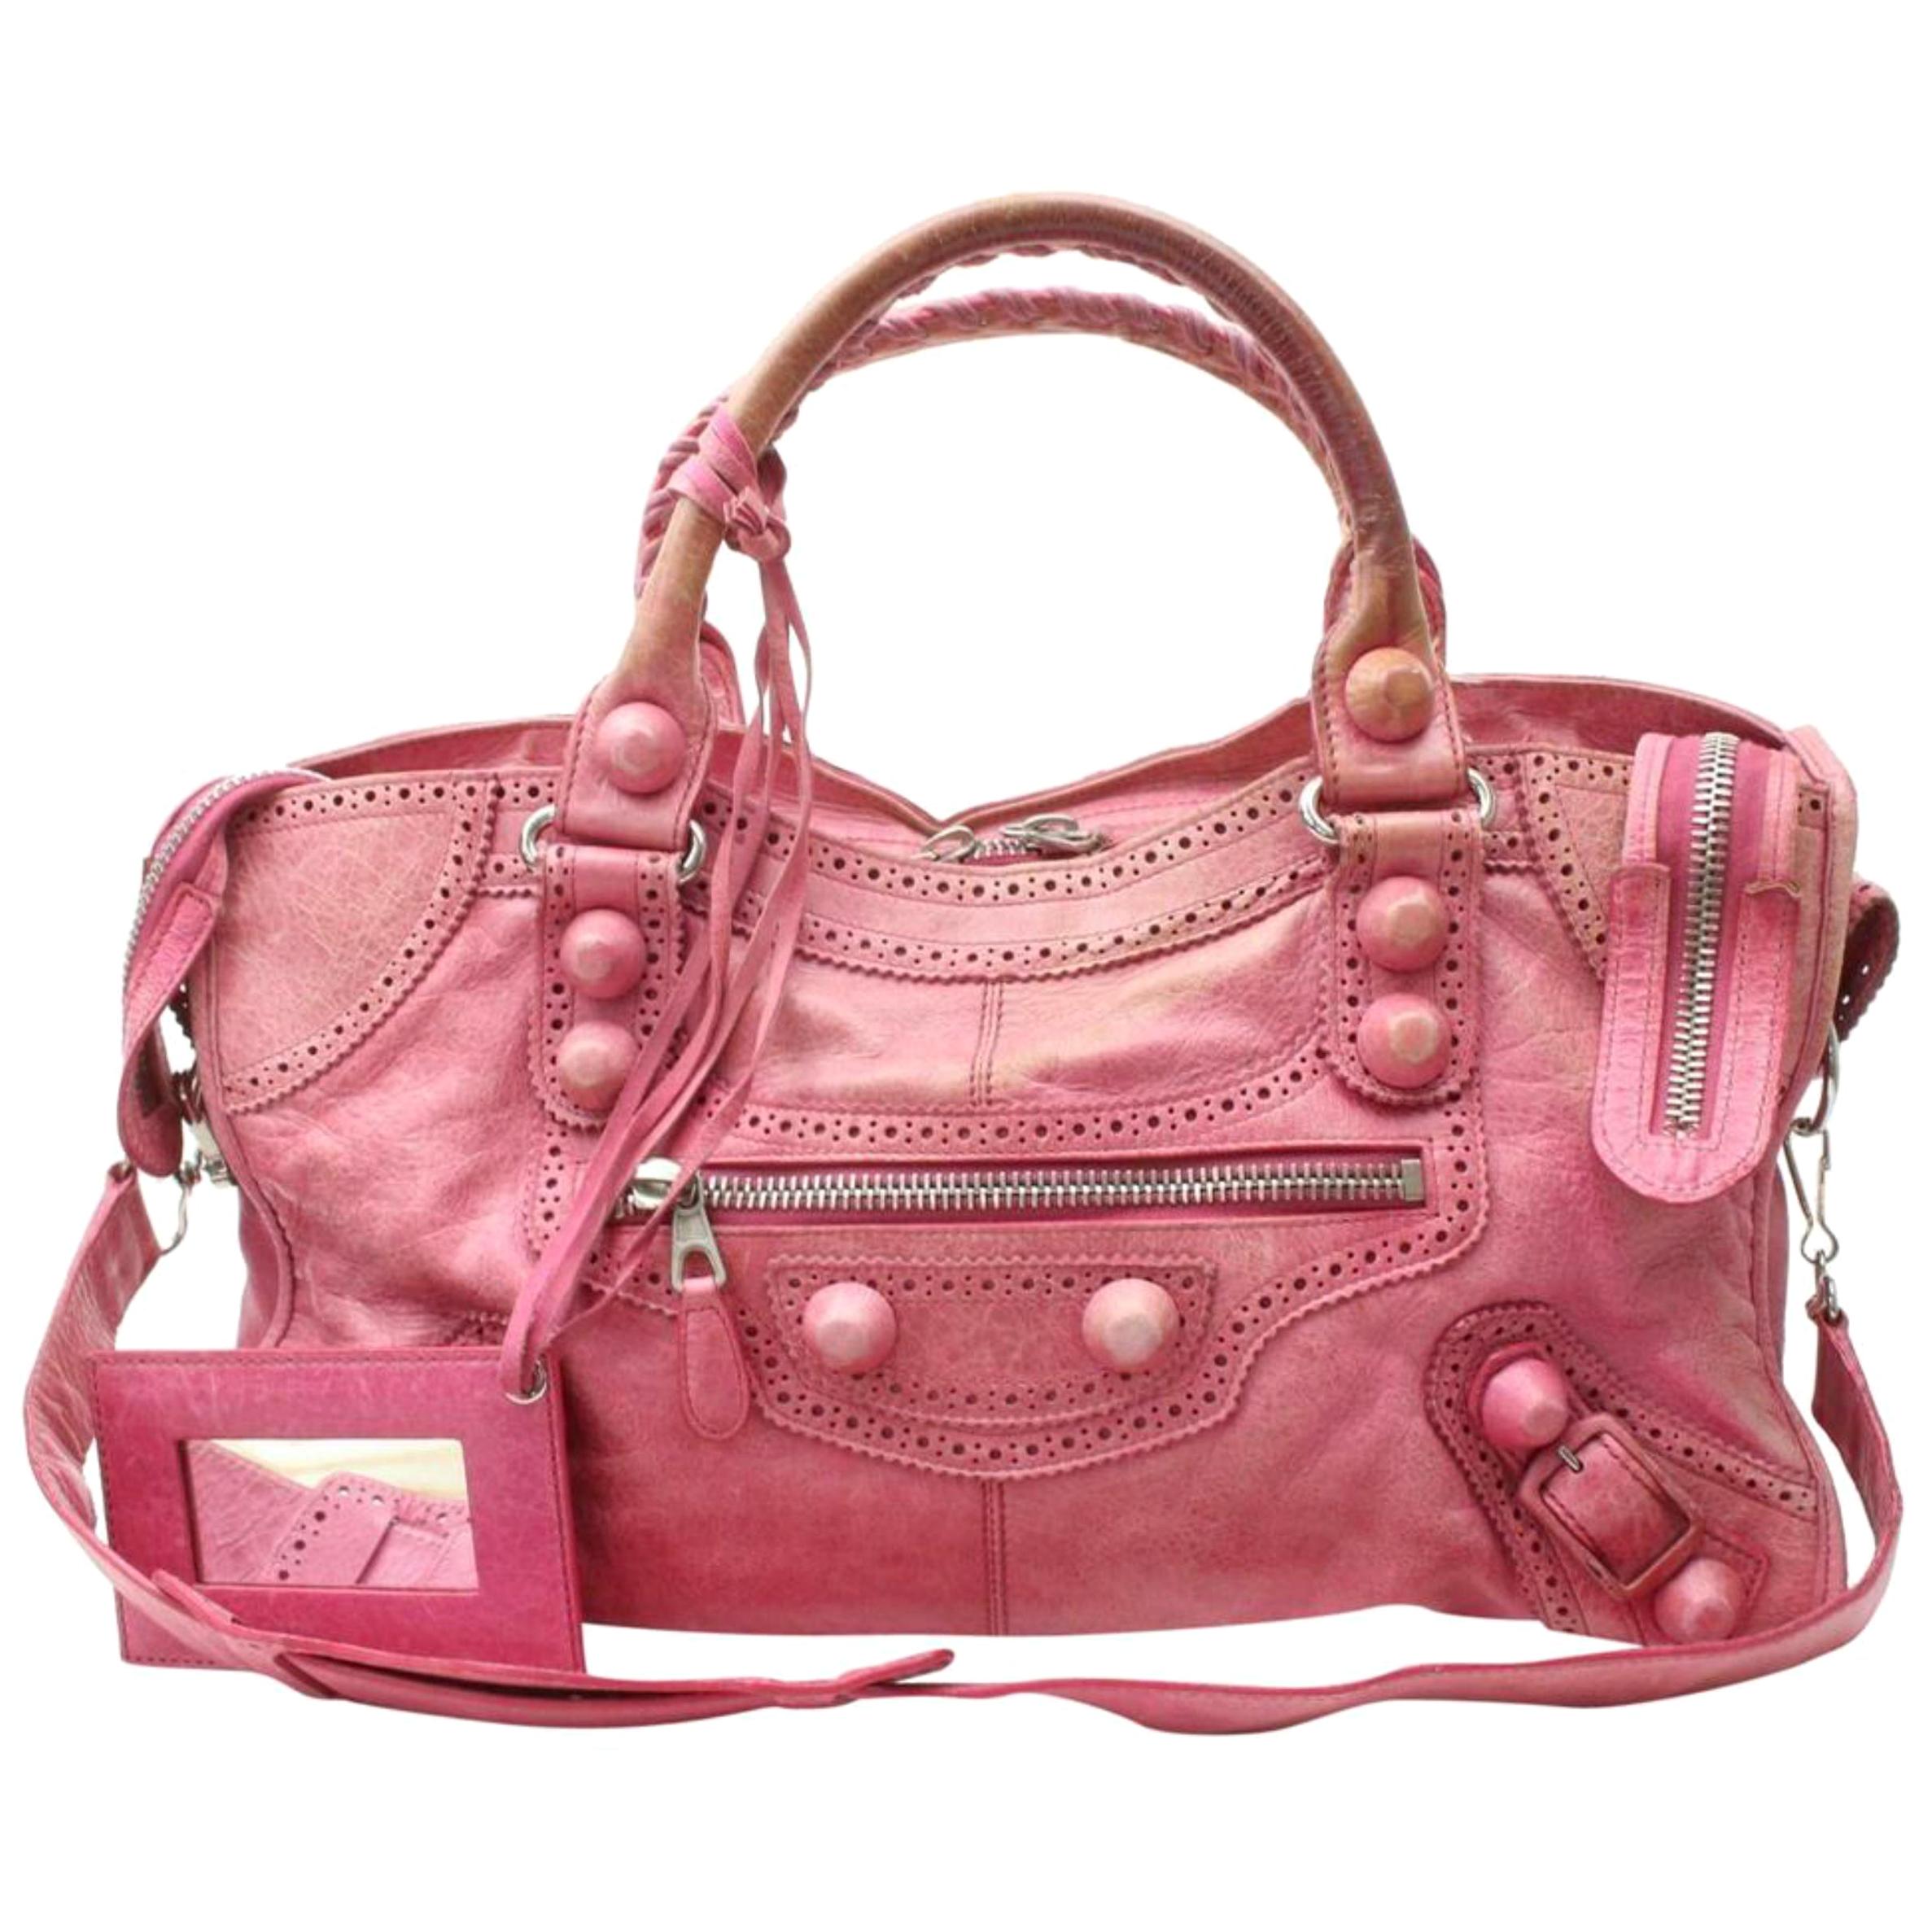 Balenciaga Oxford The City 2way 870151 Pink Leather Shoulder Bag For Sale